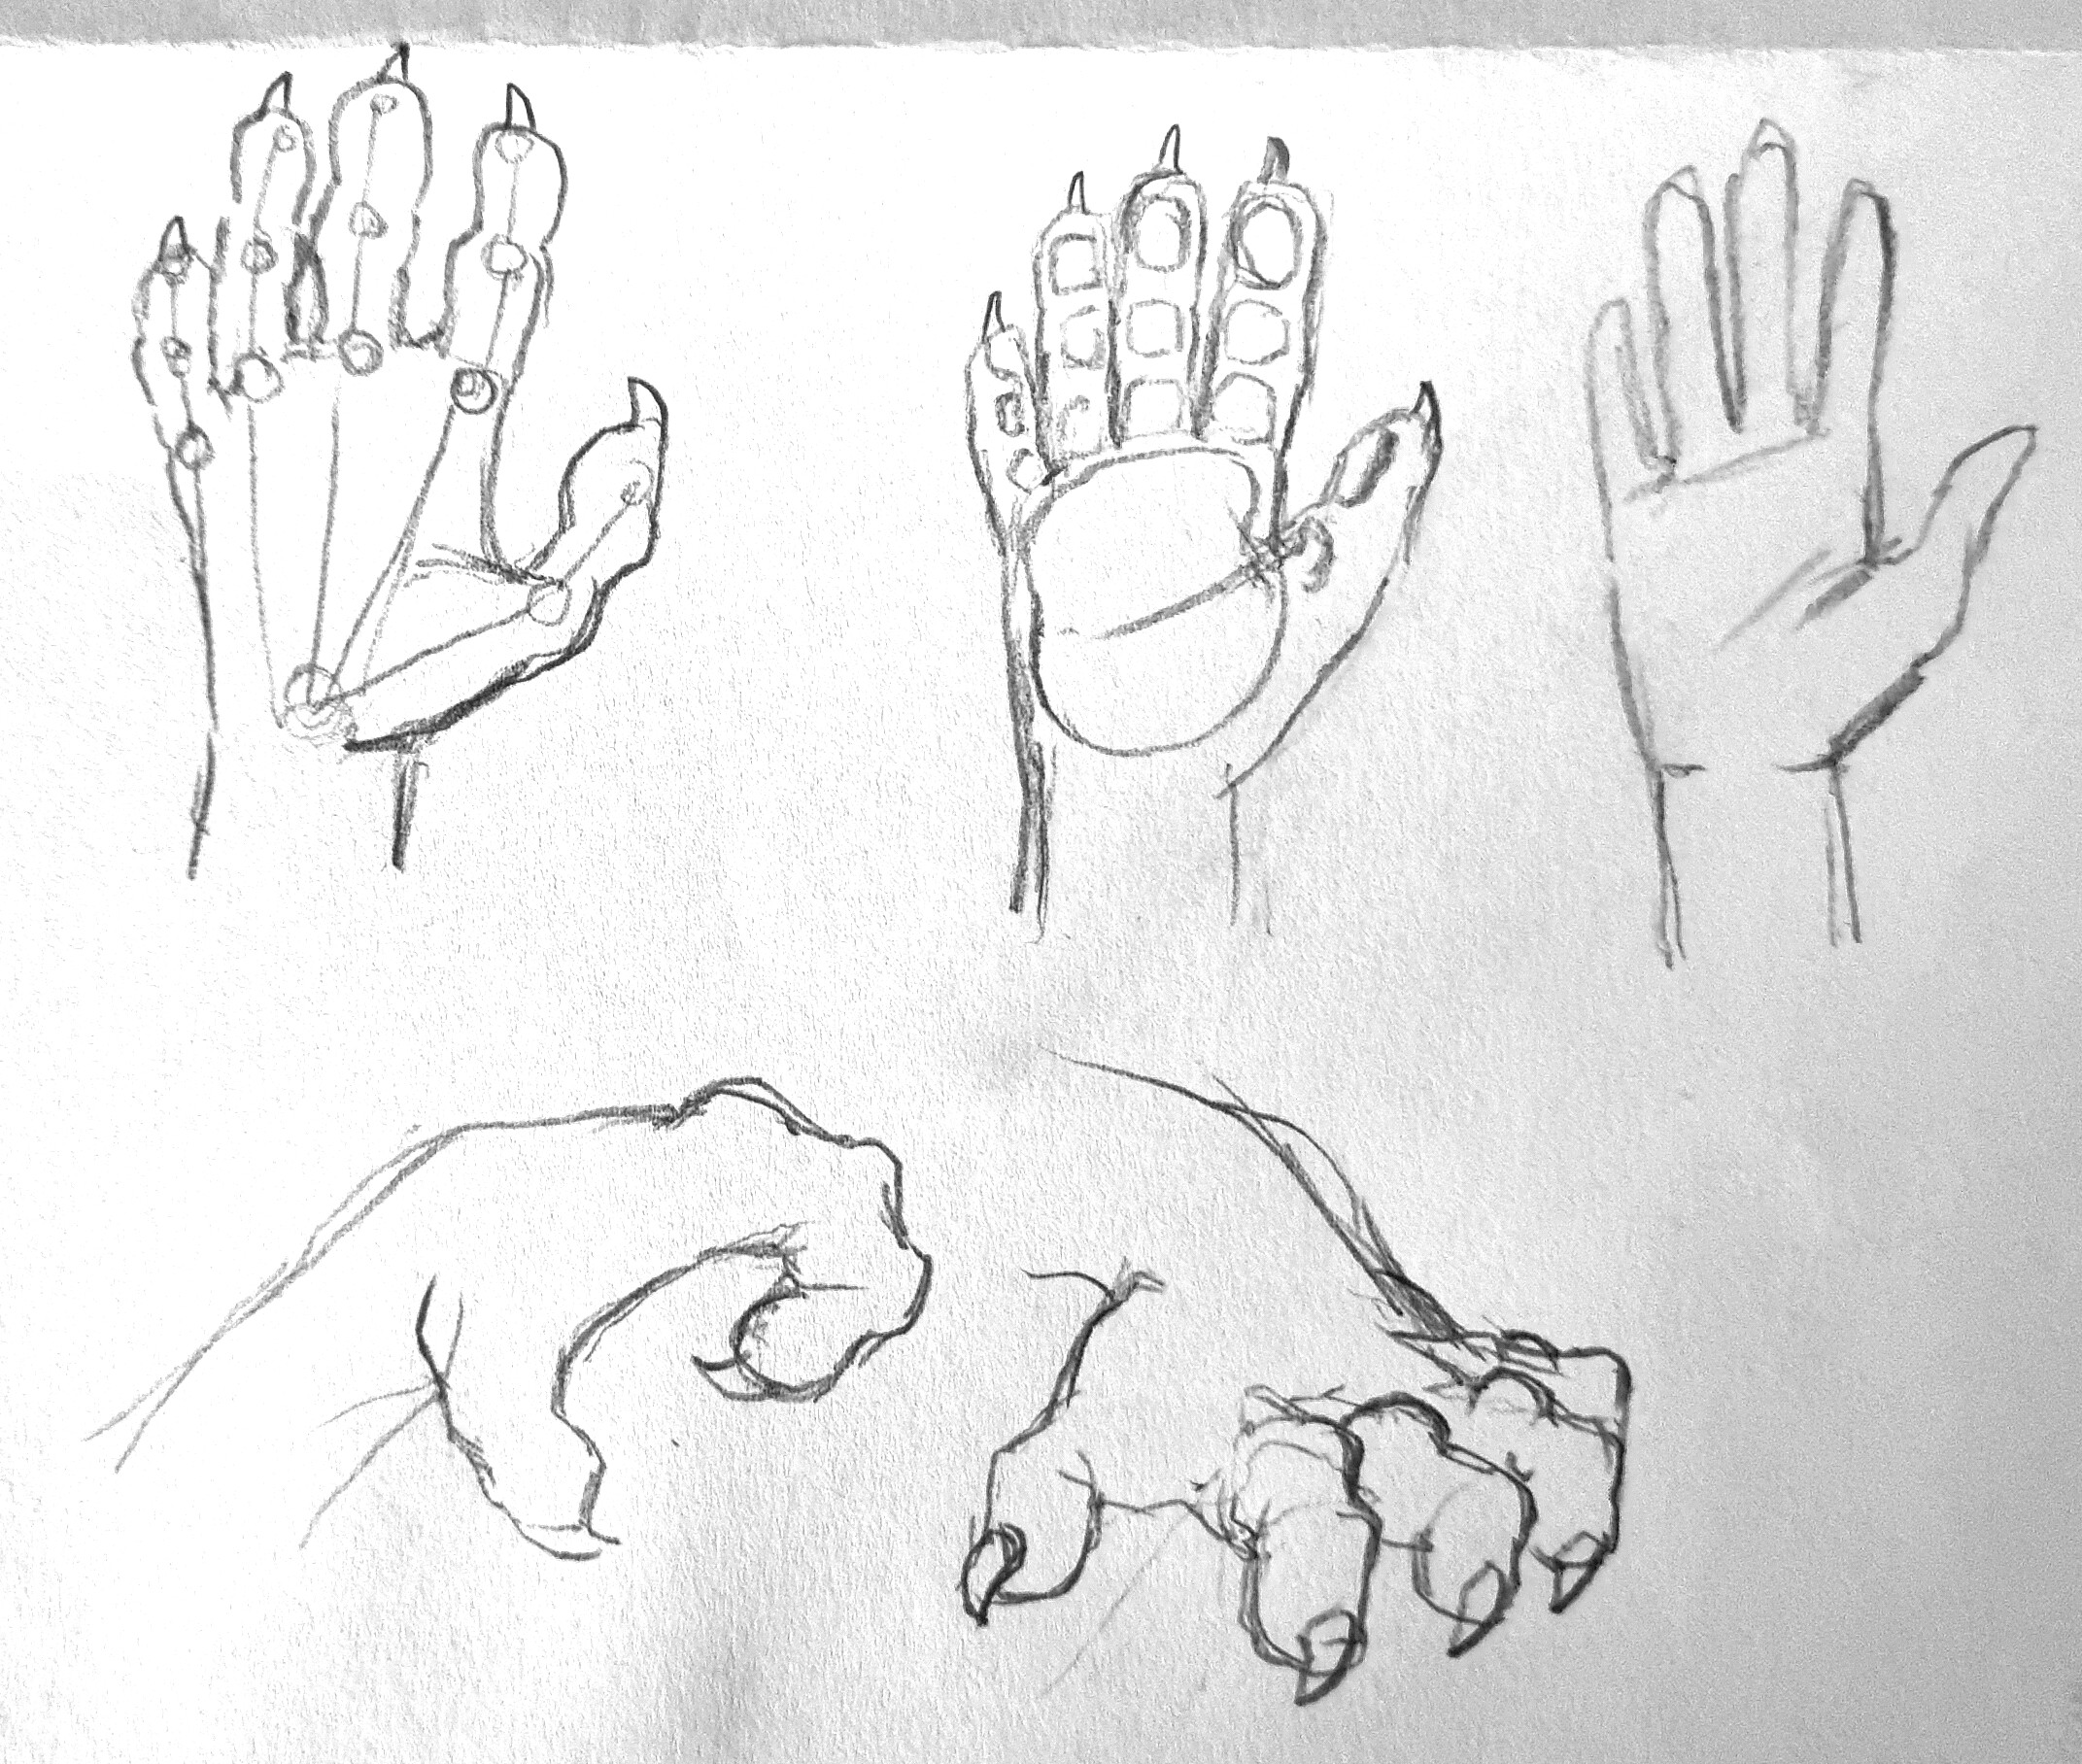 thumbs.dreamstime.com/z/hand-drawn-open-palms-blac...